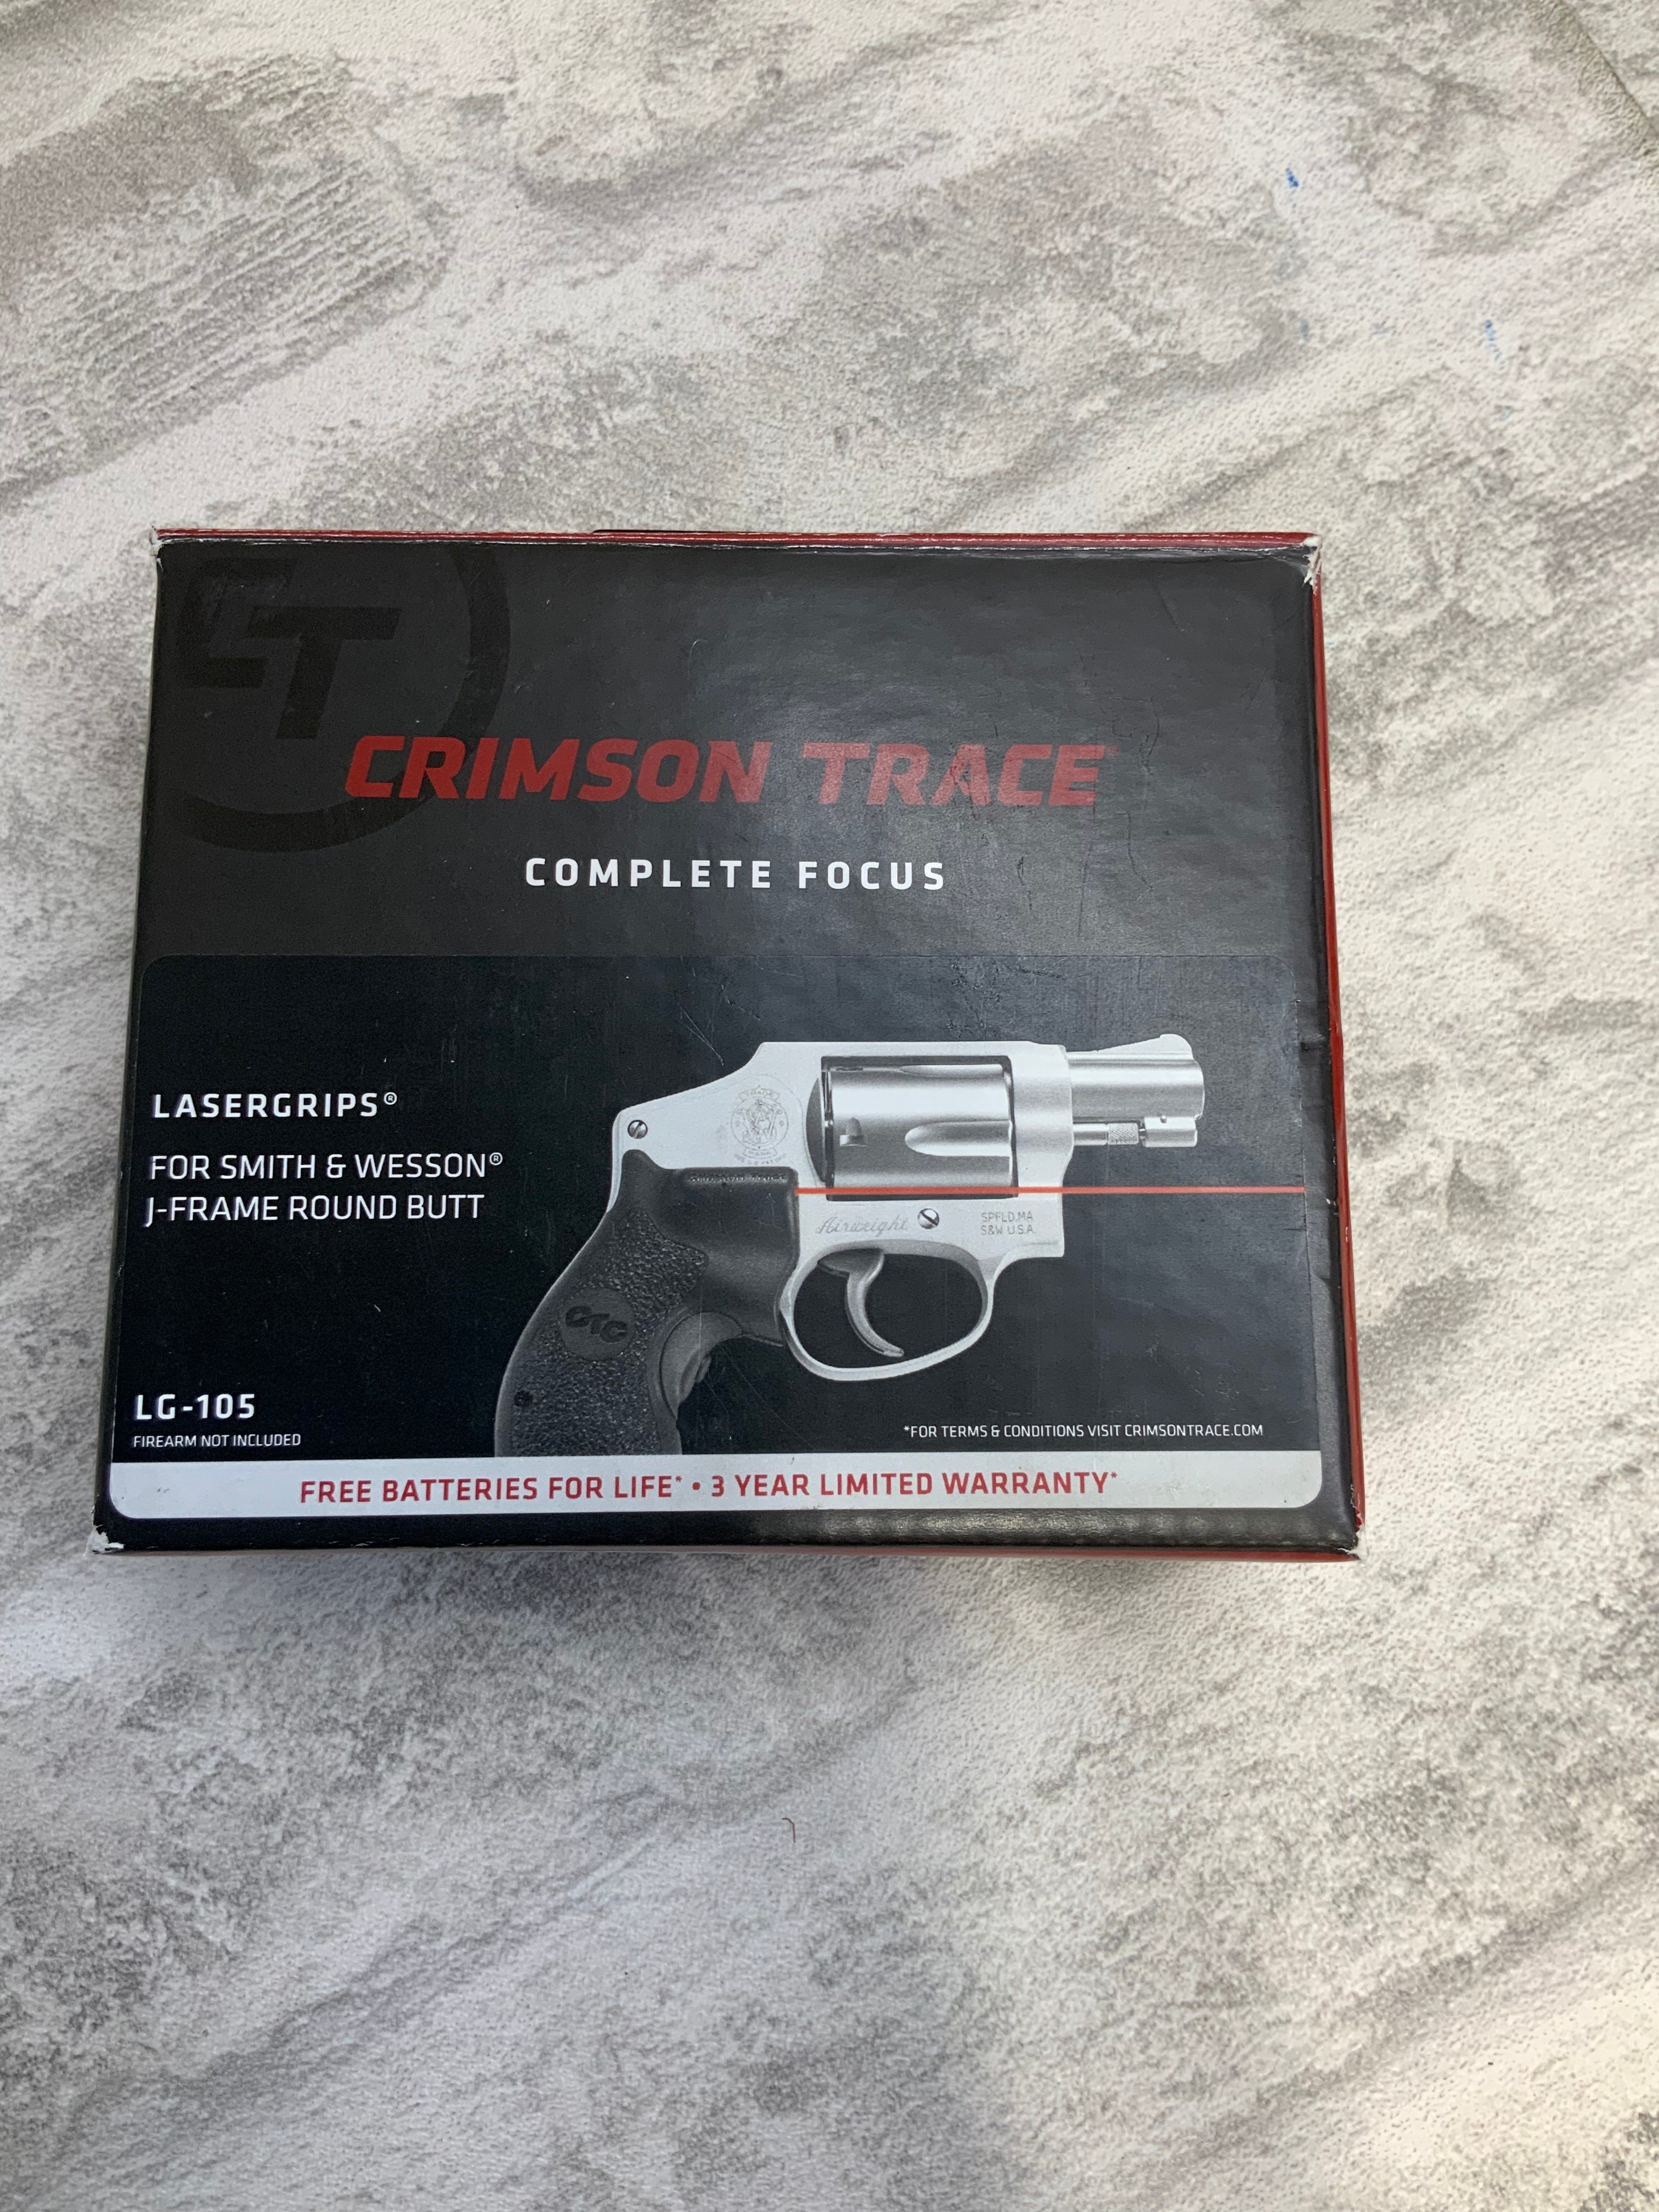 Crimson Trace LG-105 Lasergrips for Smith & Wesson J-Frame Round Butt Revolvers (7611466875118)